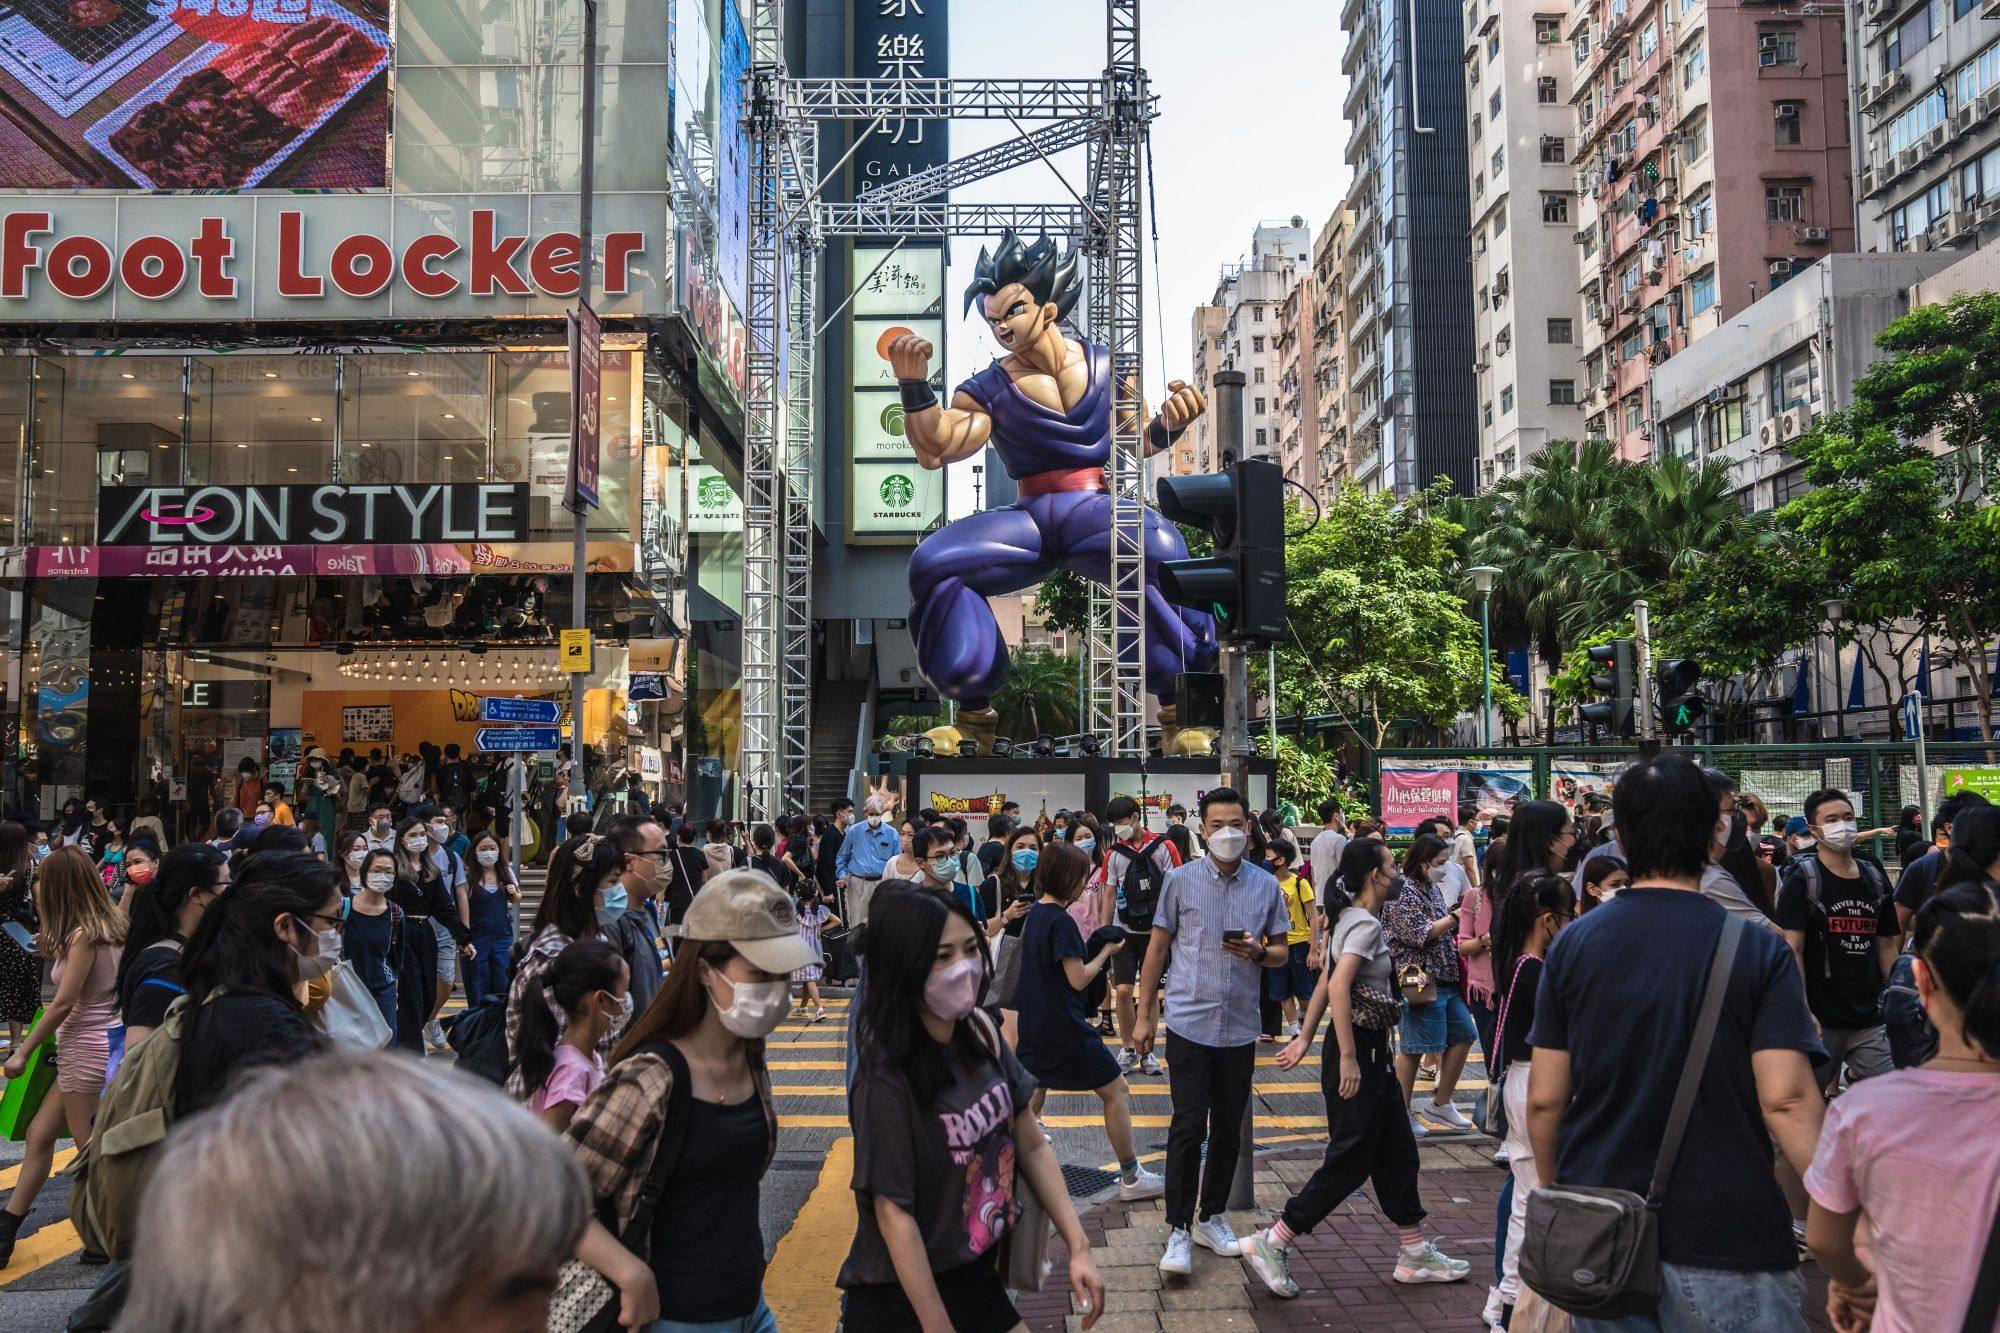 Pedestrians cross a road in Hong Kong on October 15. Hong Kong wants to become an international centre for virtual assets as the city seeks to bolster its status as a global financial hub after pandemic disruptions. Photo: Bloomberg